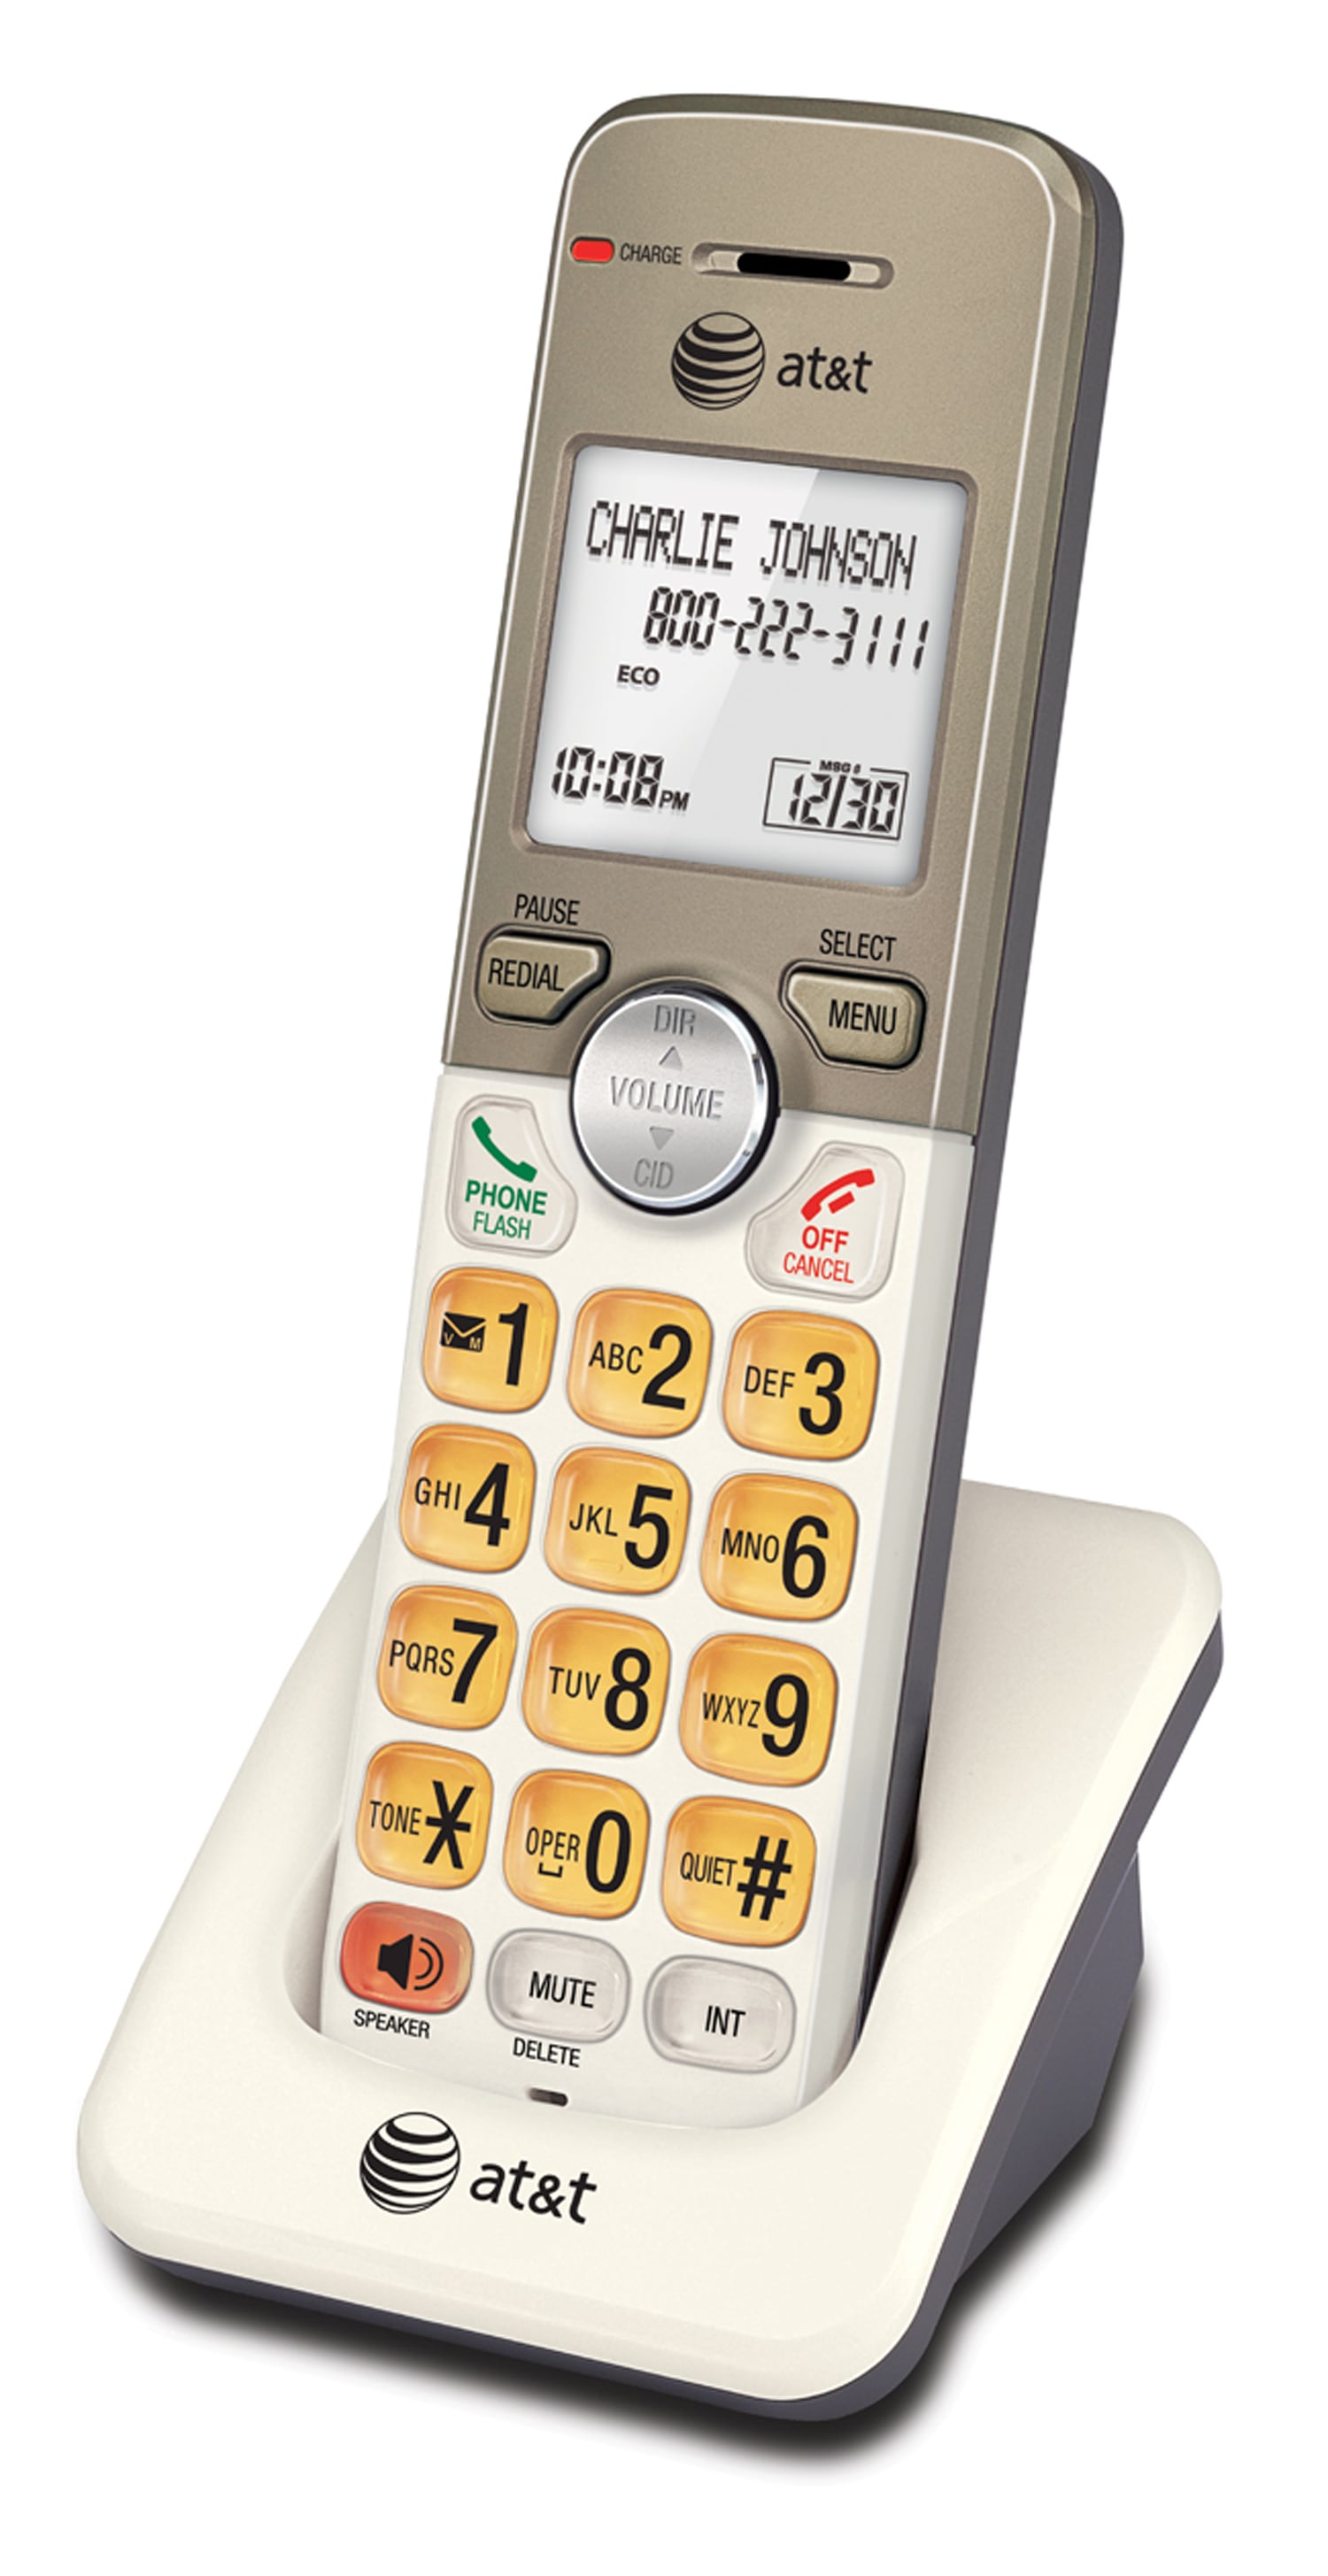 Cordless phone system with caller ID/call waiting - view 5